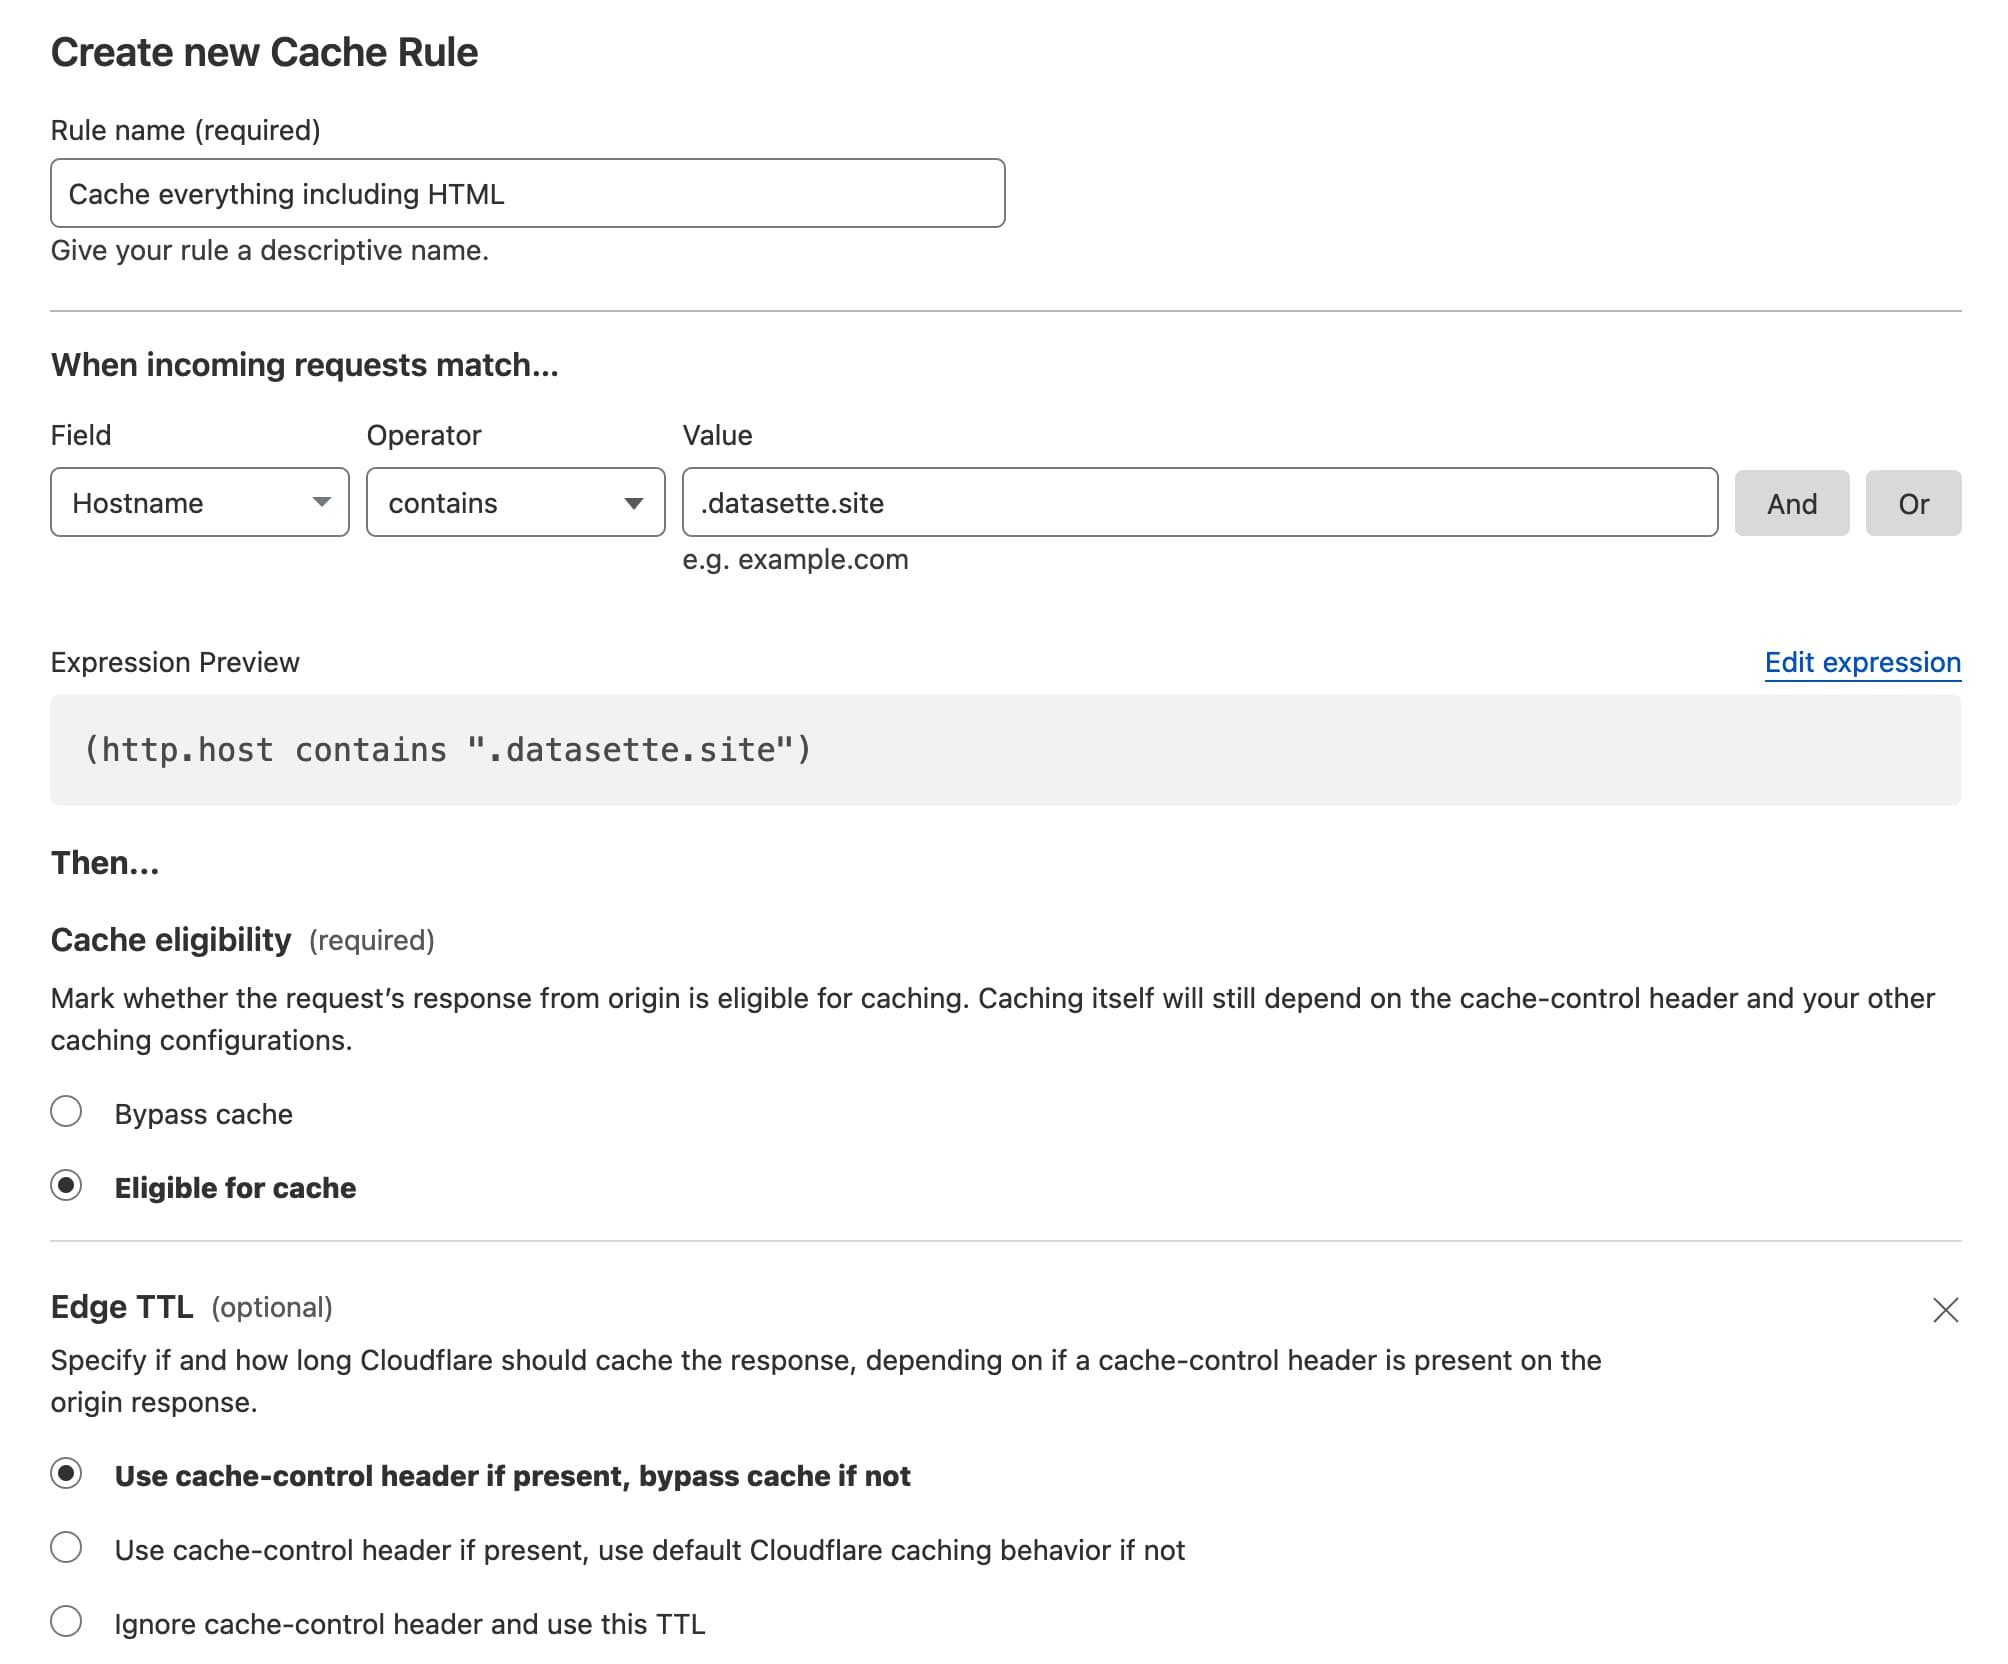 Cloudflare Cache Rule interface. Rule name: Cache everything including HTML. When incoming requests match… hostname contains .datasette.site. Expression preview: (http.host contains ".datasette.site"). Then... Cache Elegibility is set to Eligible for cache. Edge TTL is set to Use cache-control header if present, bypass cache if not.